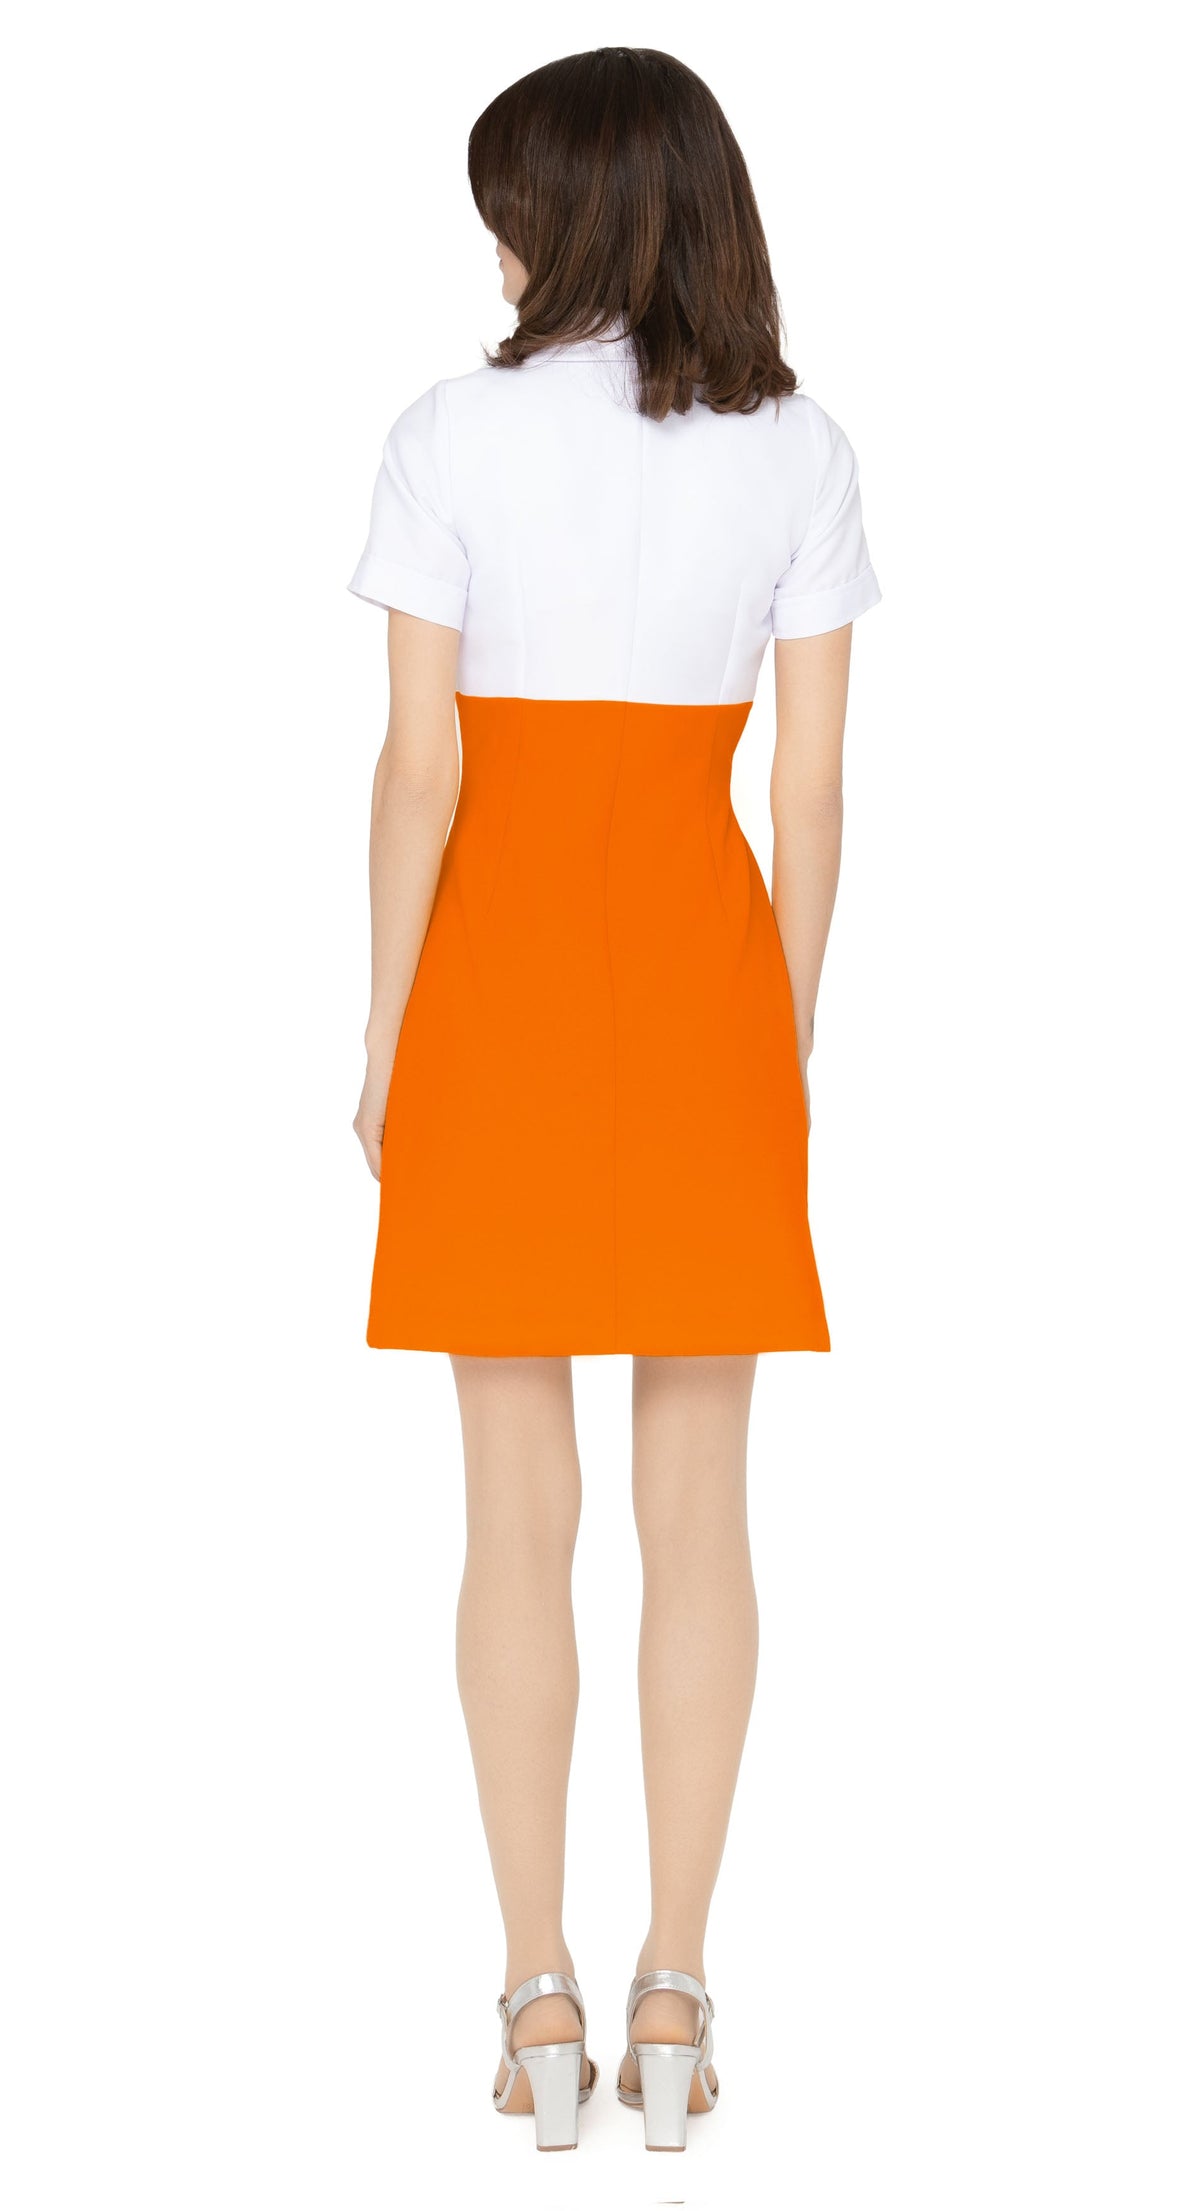 Vintage sport inspired dress, Casual, cool and immediately spring. This fitted, slightly A-line dress features a classic oversized 70s style collar and imaginative contrasting paneling across the skirting, torso, and neckline, giving it a modern twist on European sports styles of the sixties and seventies. The retro looped zipper front closure and short sleeves add to its vintage charm.